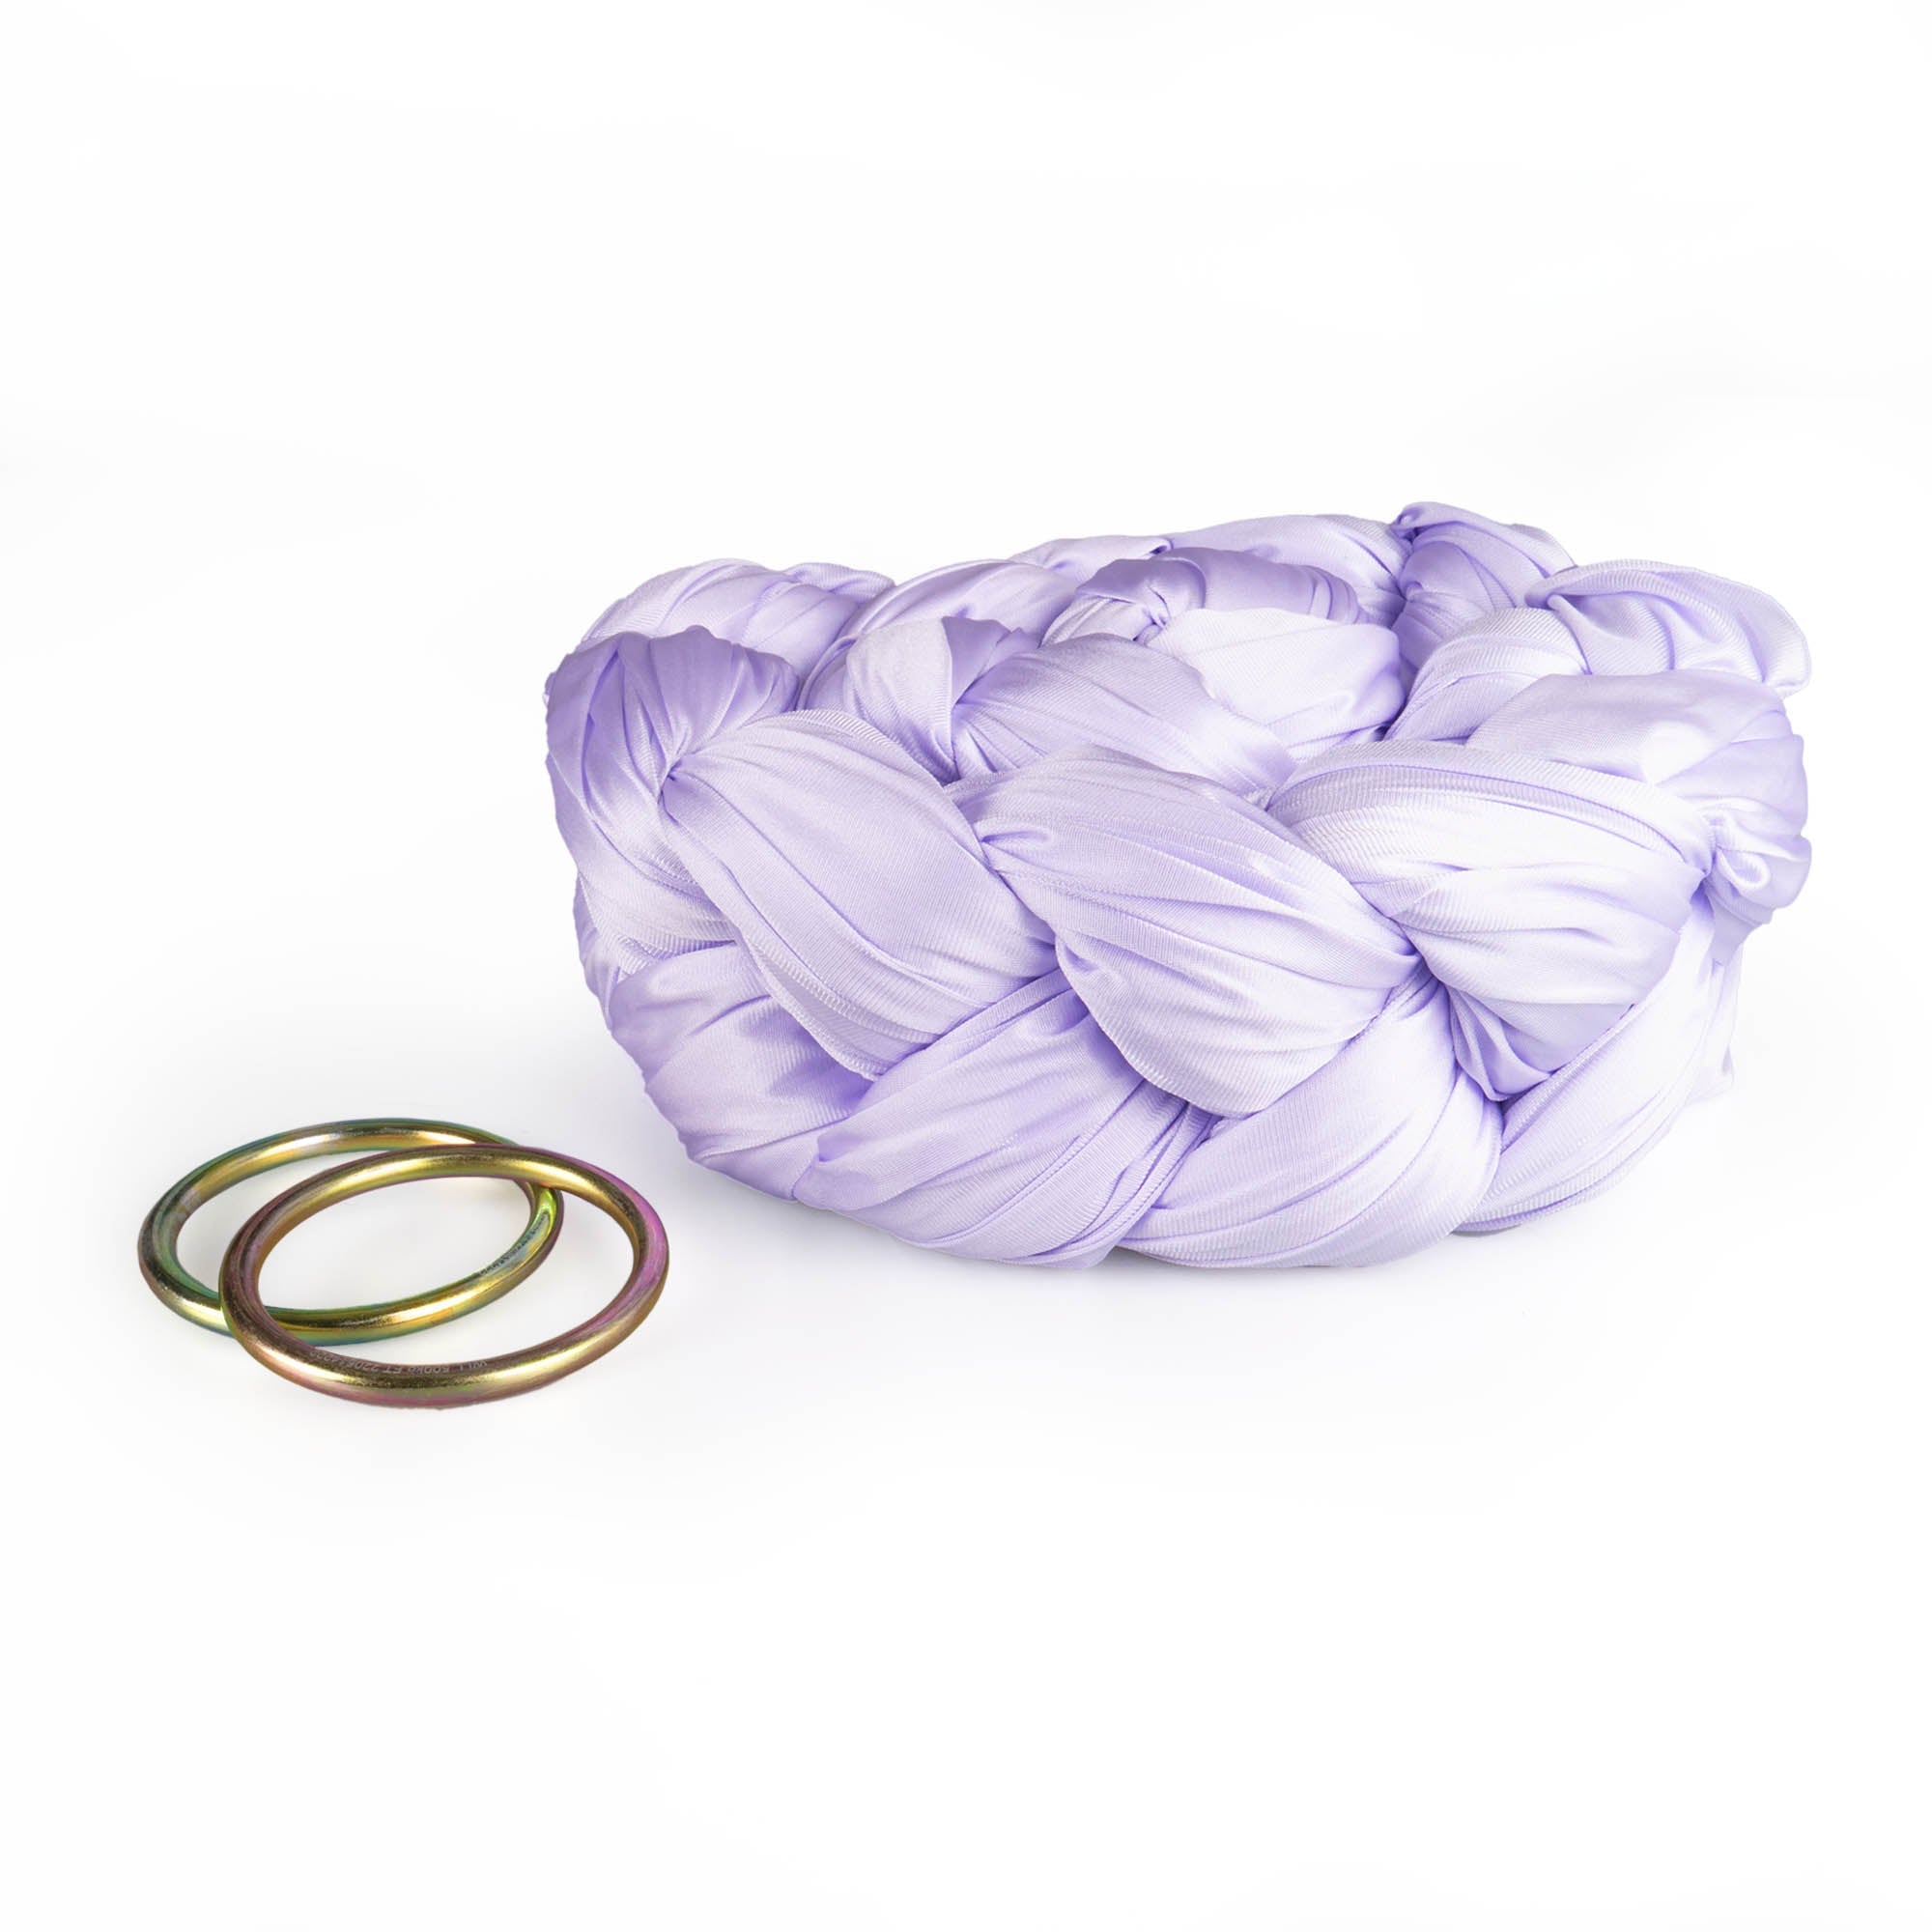 Prodigy 6m lilac aerial yoga hammock daisy chained with rings